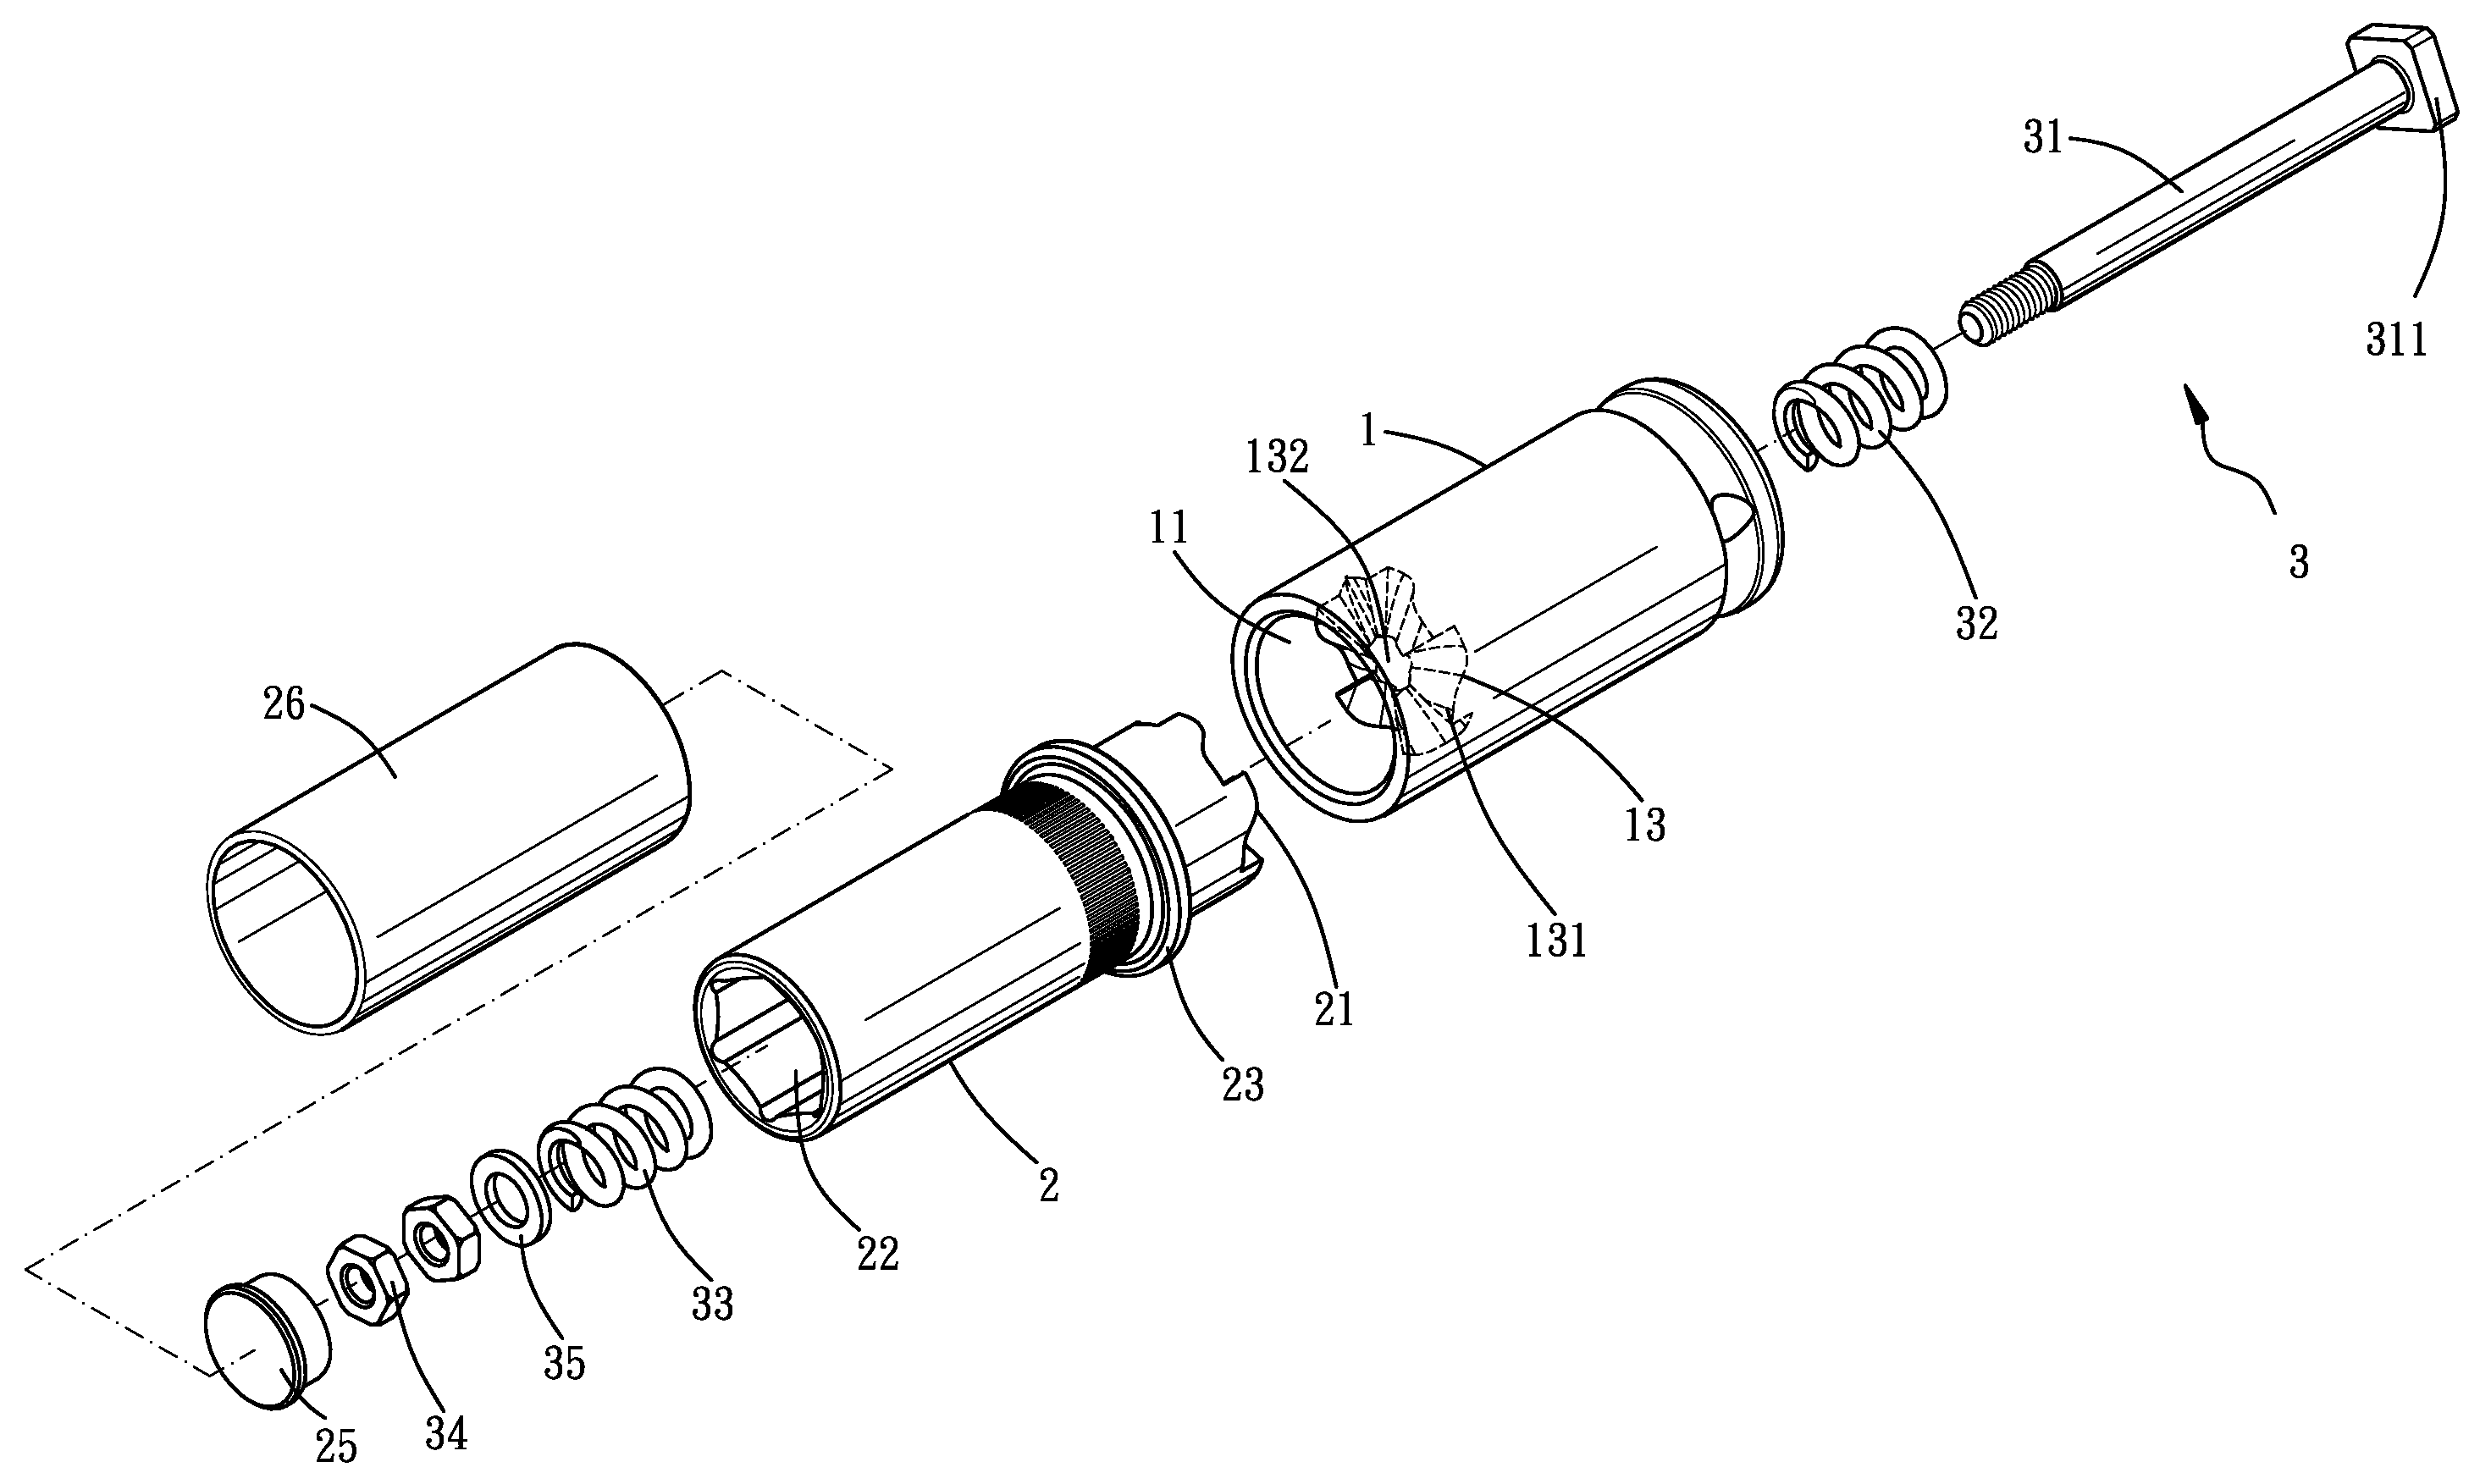 Torque adjustable sleeve assembly